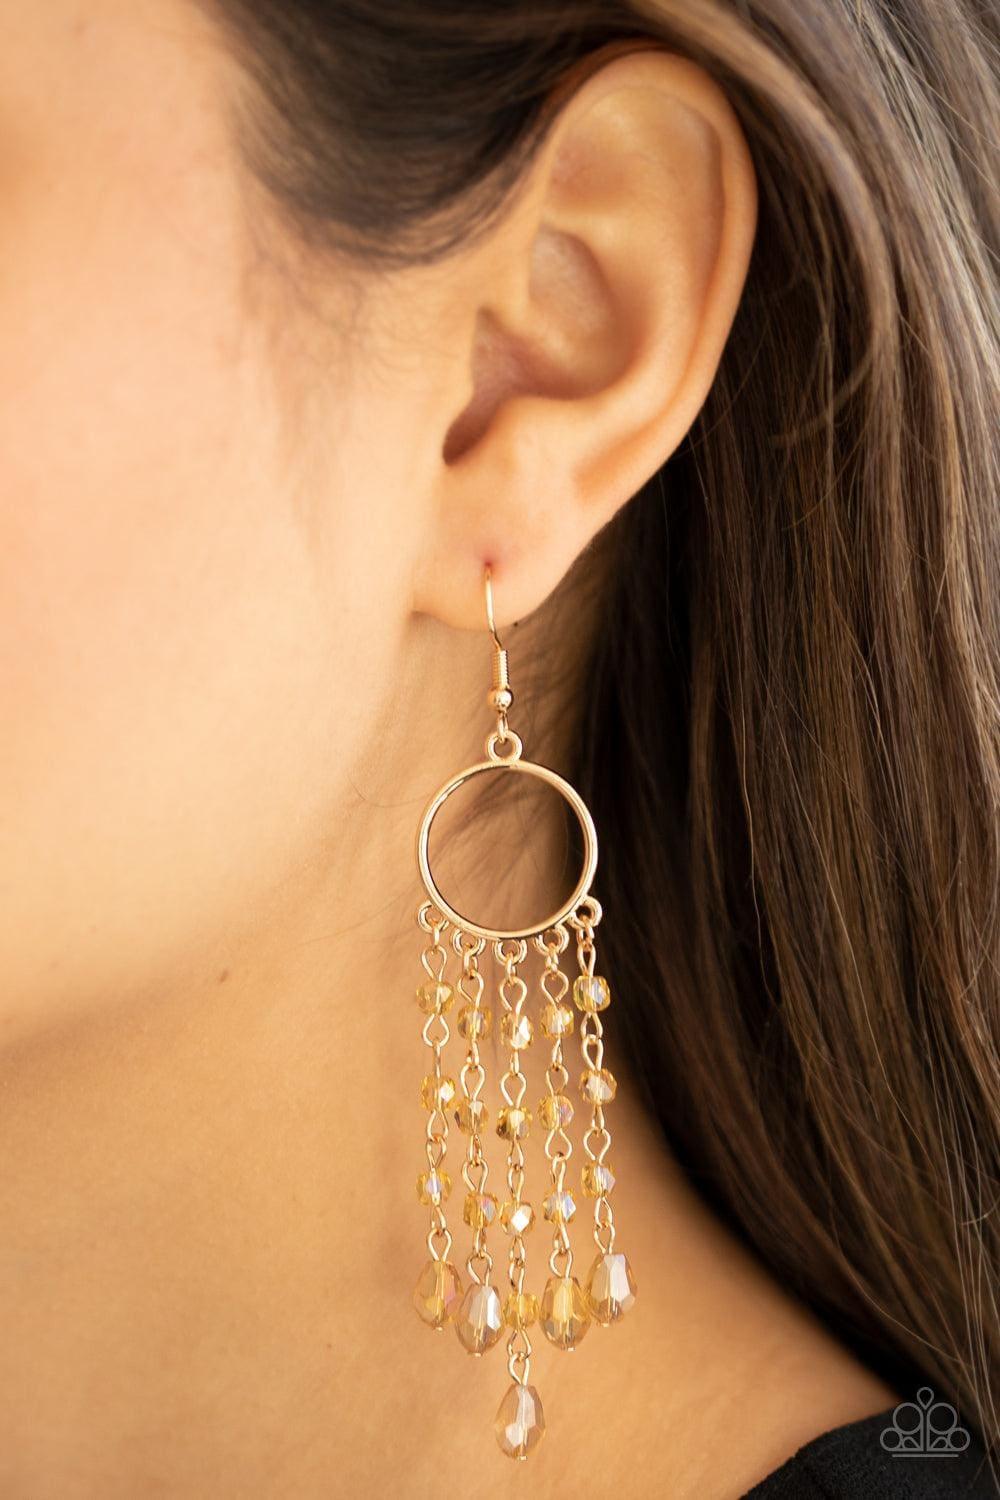 Paparazzi Accessories - Dazzling Delicious - Gold Earrings - Bling by JessieK